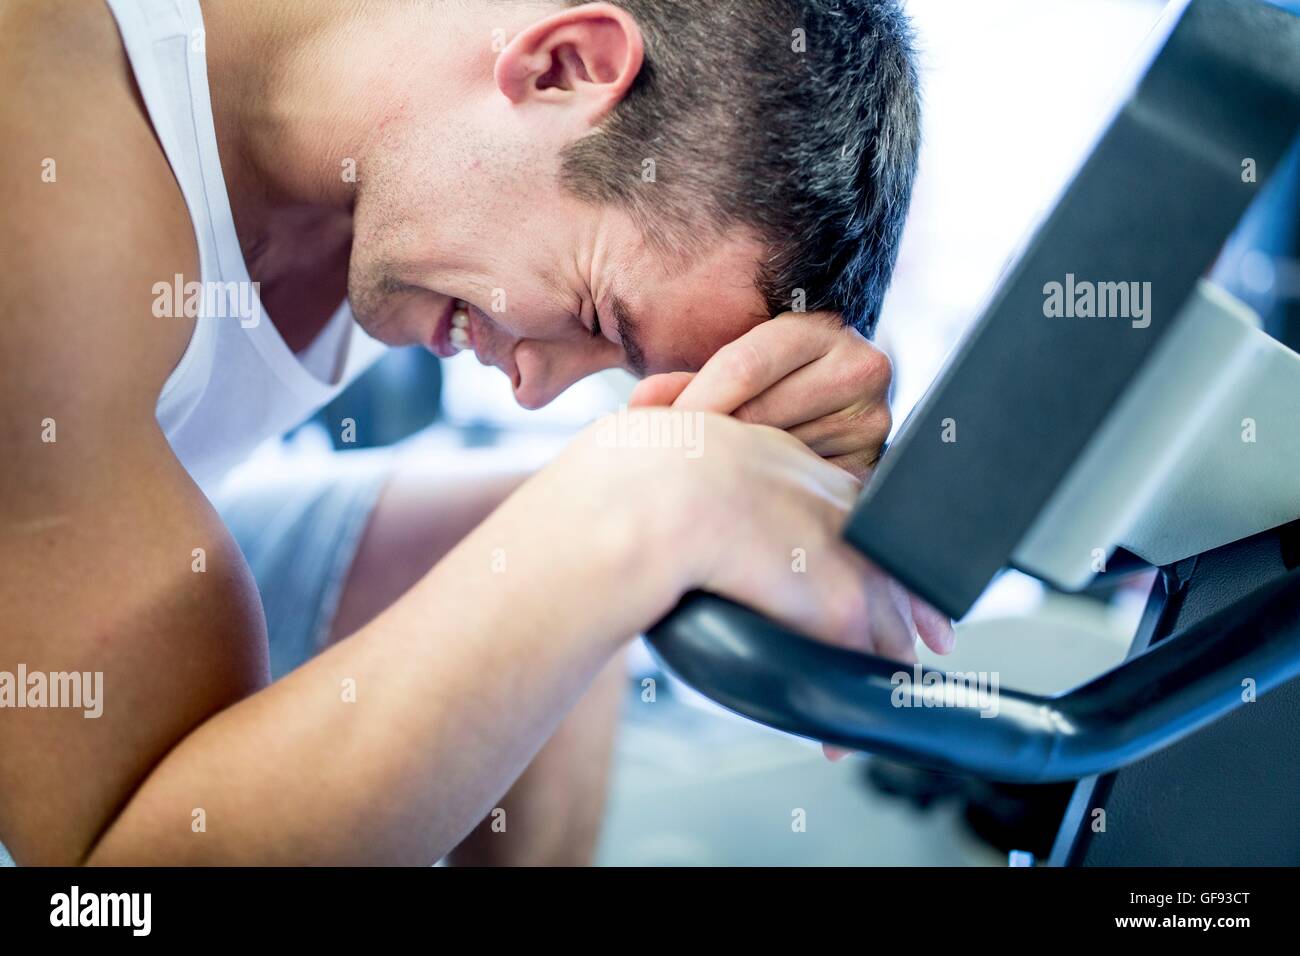 PROPERTY RELEASED. MODEL RELEASED. Close-up of young man resting his head on exercise machine in gym, smiling. Stock Photo